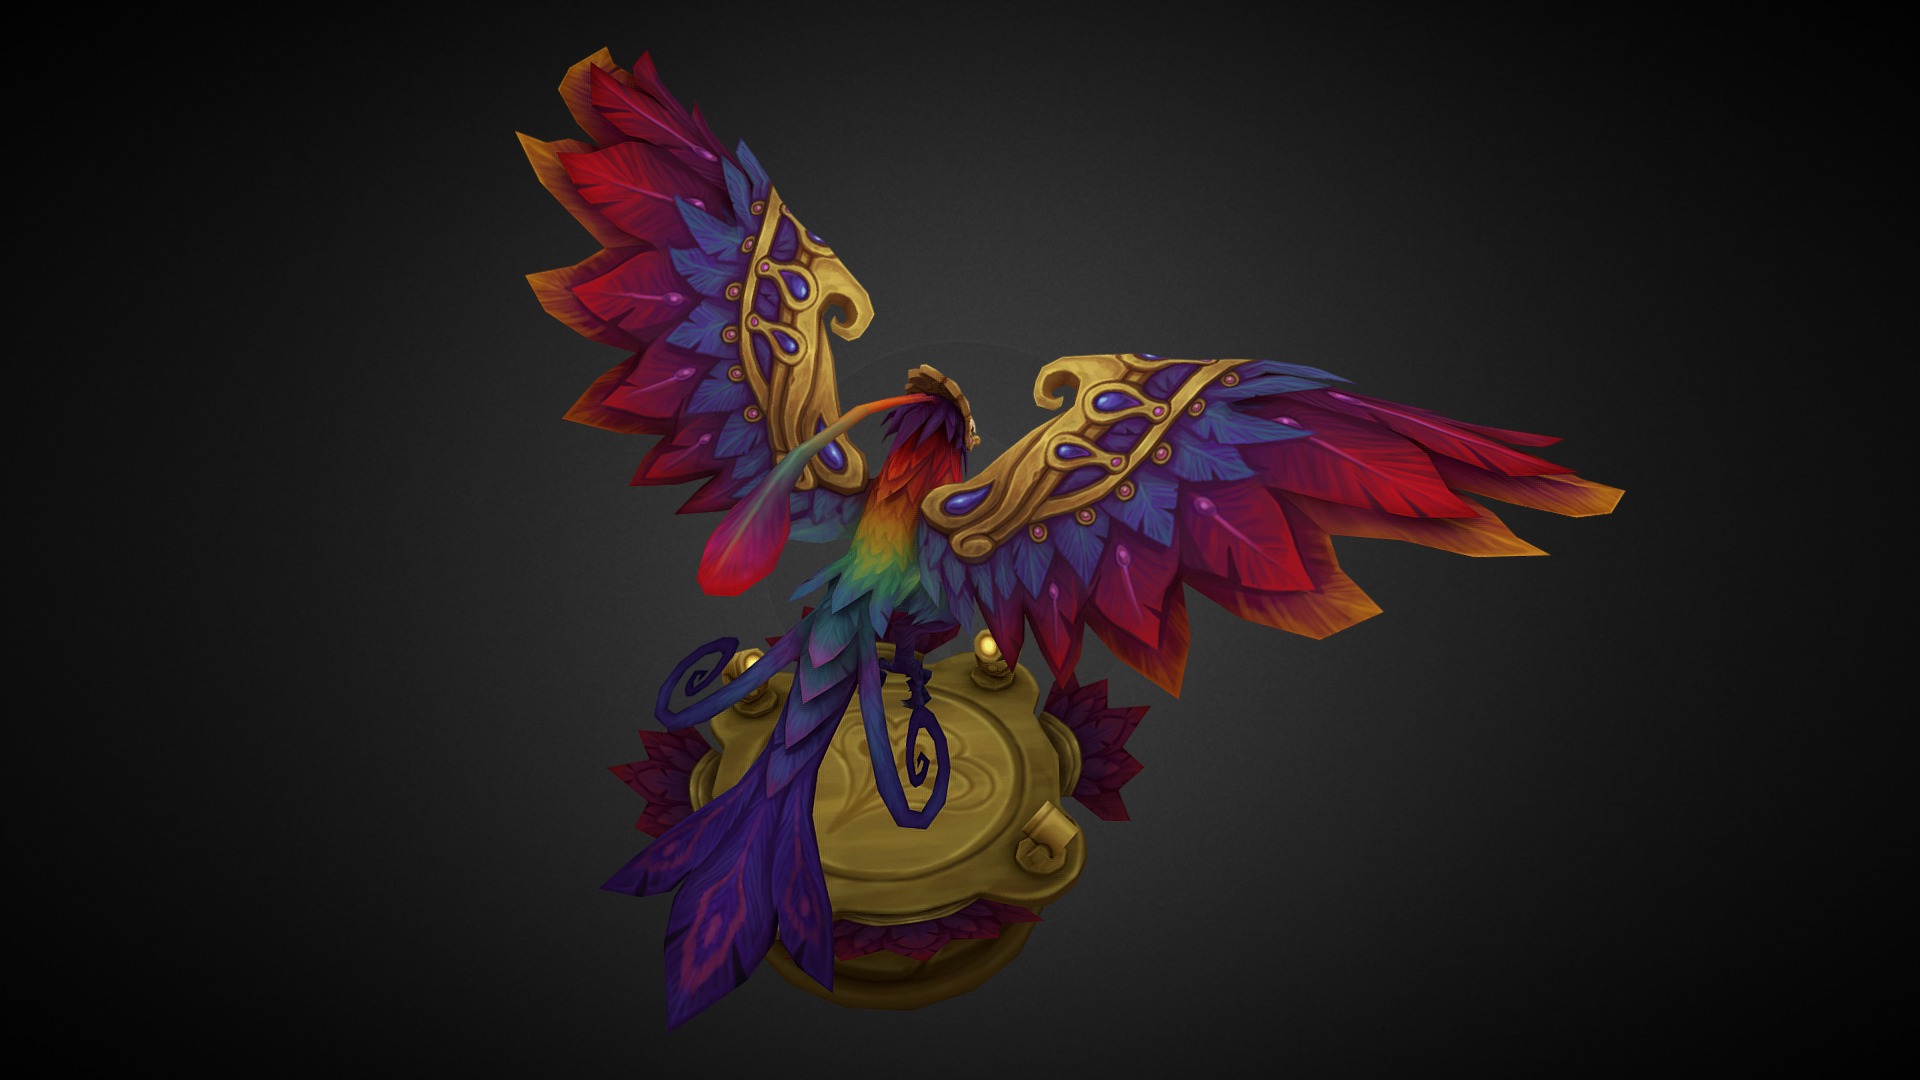 &lsquo;Festival Queen' Anivia skin I did recently. Carnaval inspired 3d model